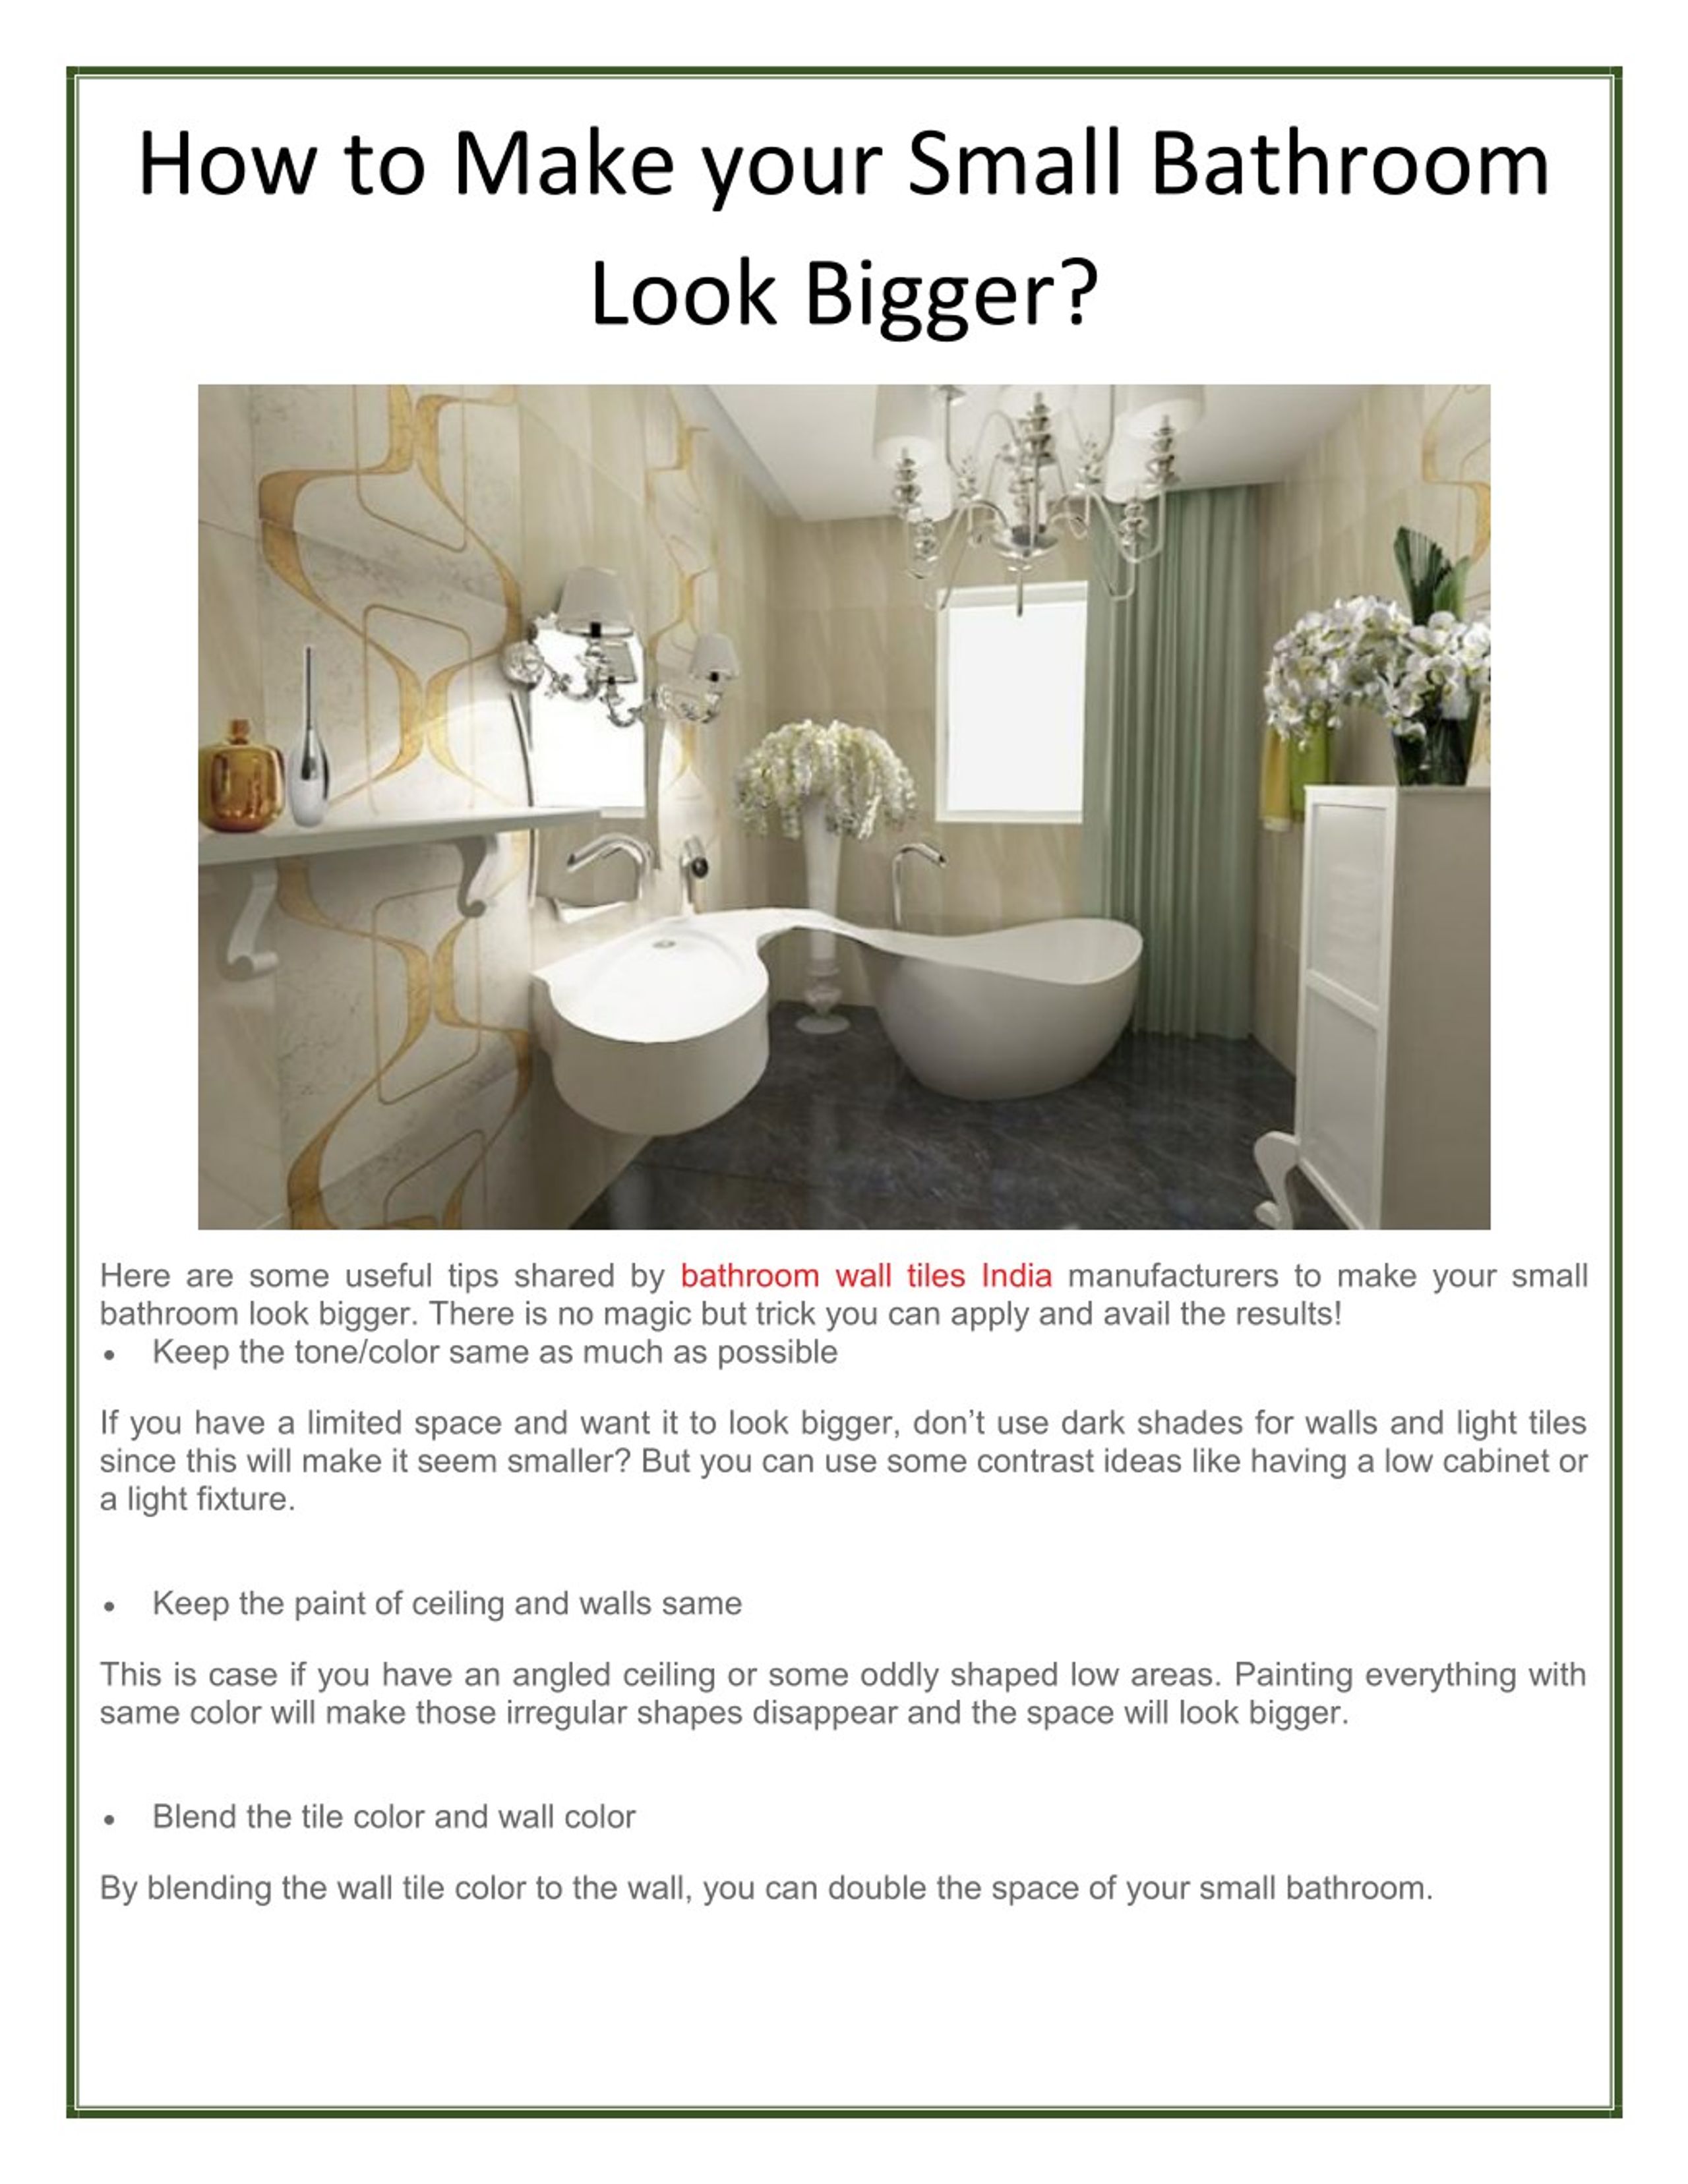 Ppt How To Make Your Small Bathroom Look Bigger Powerpoint